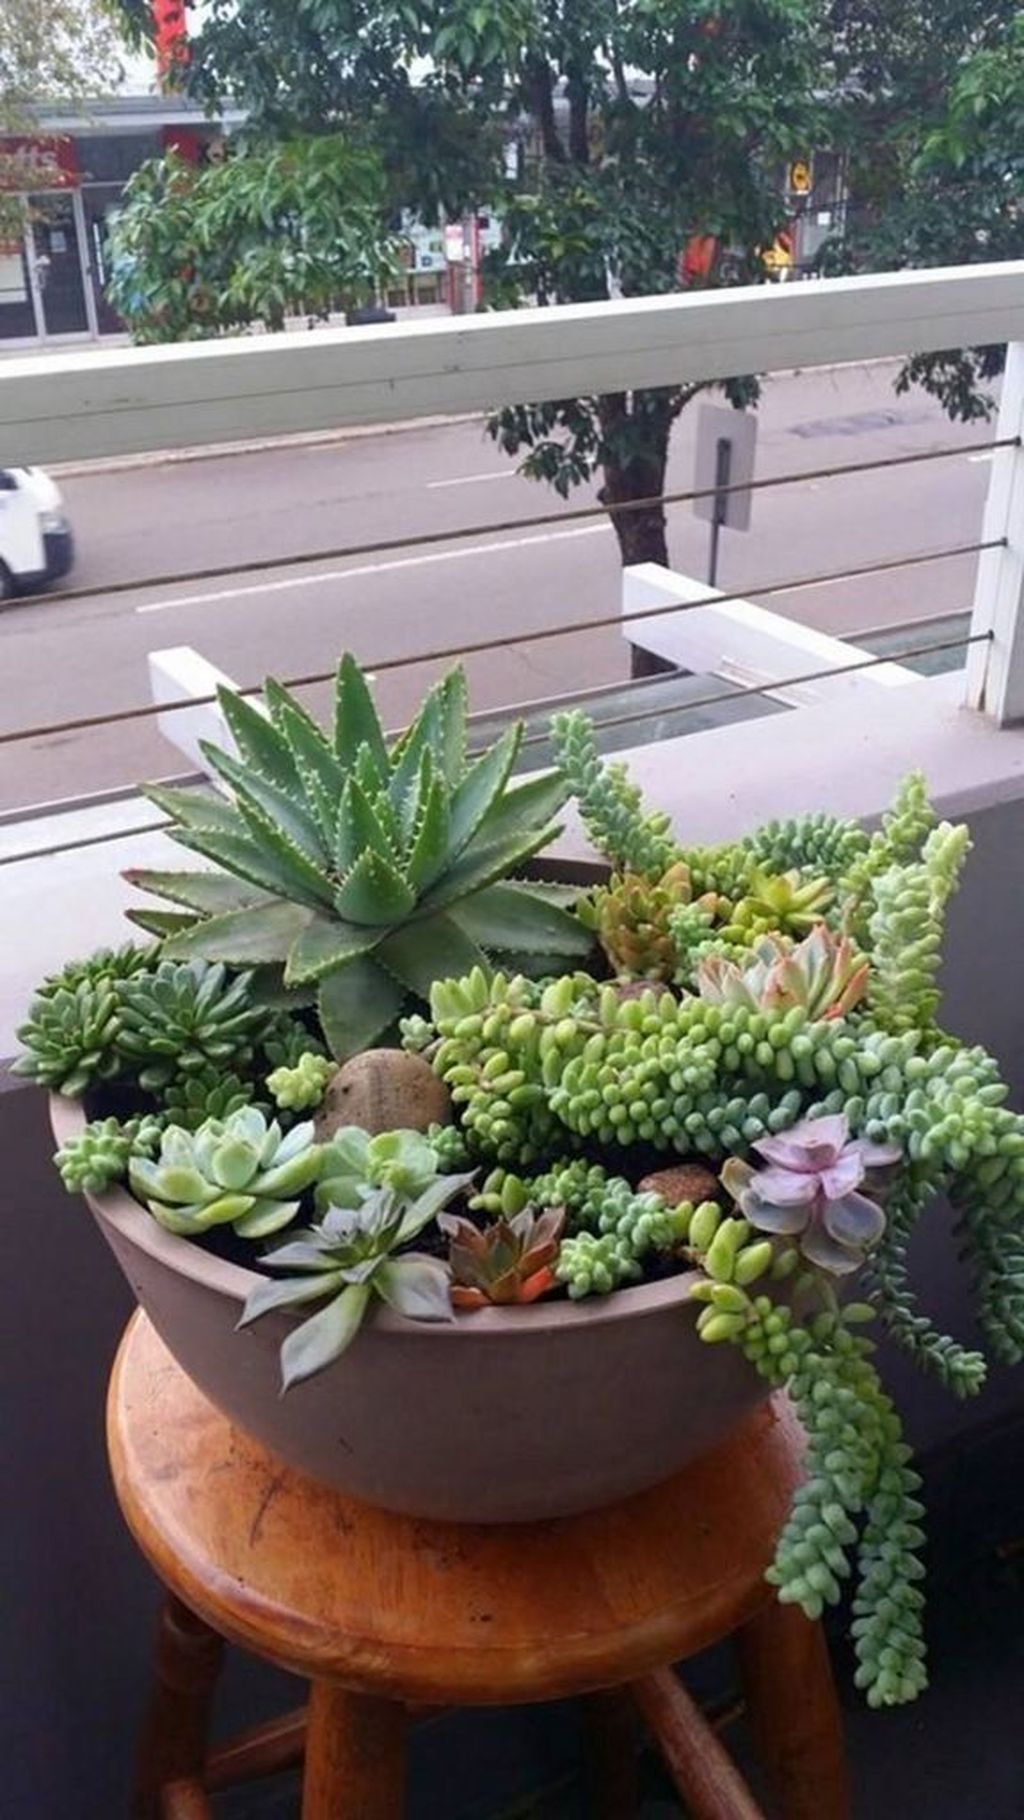 Awesome Succulent Garden Ideas In Your Backyard 22